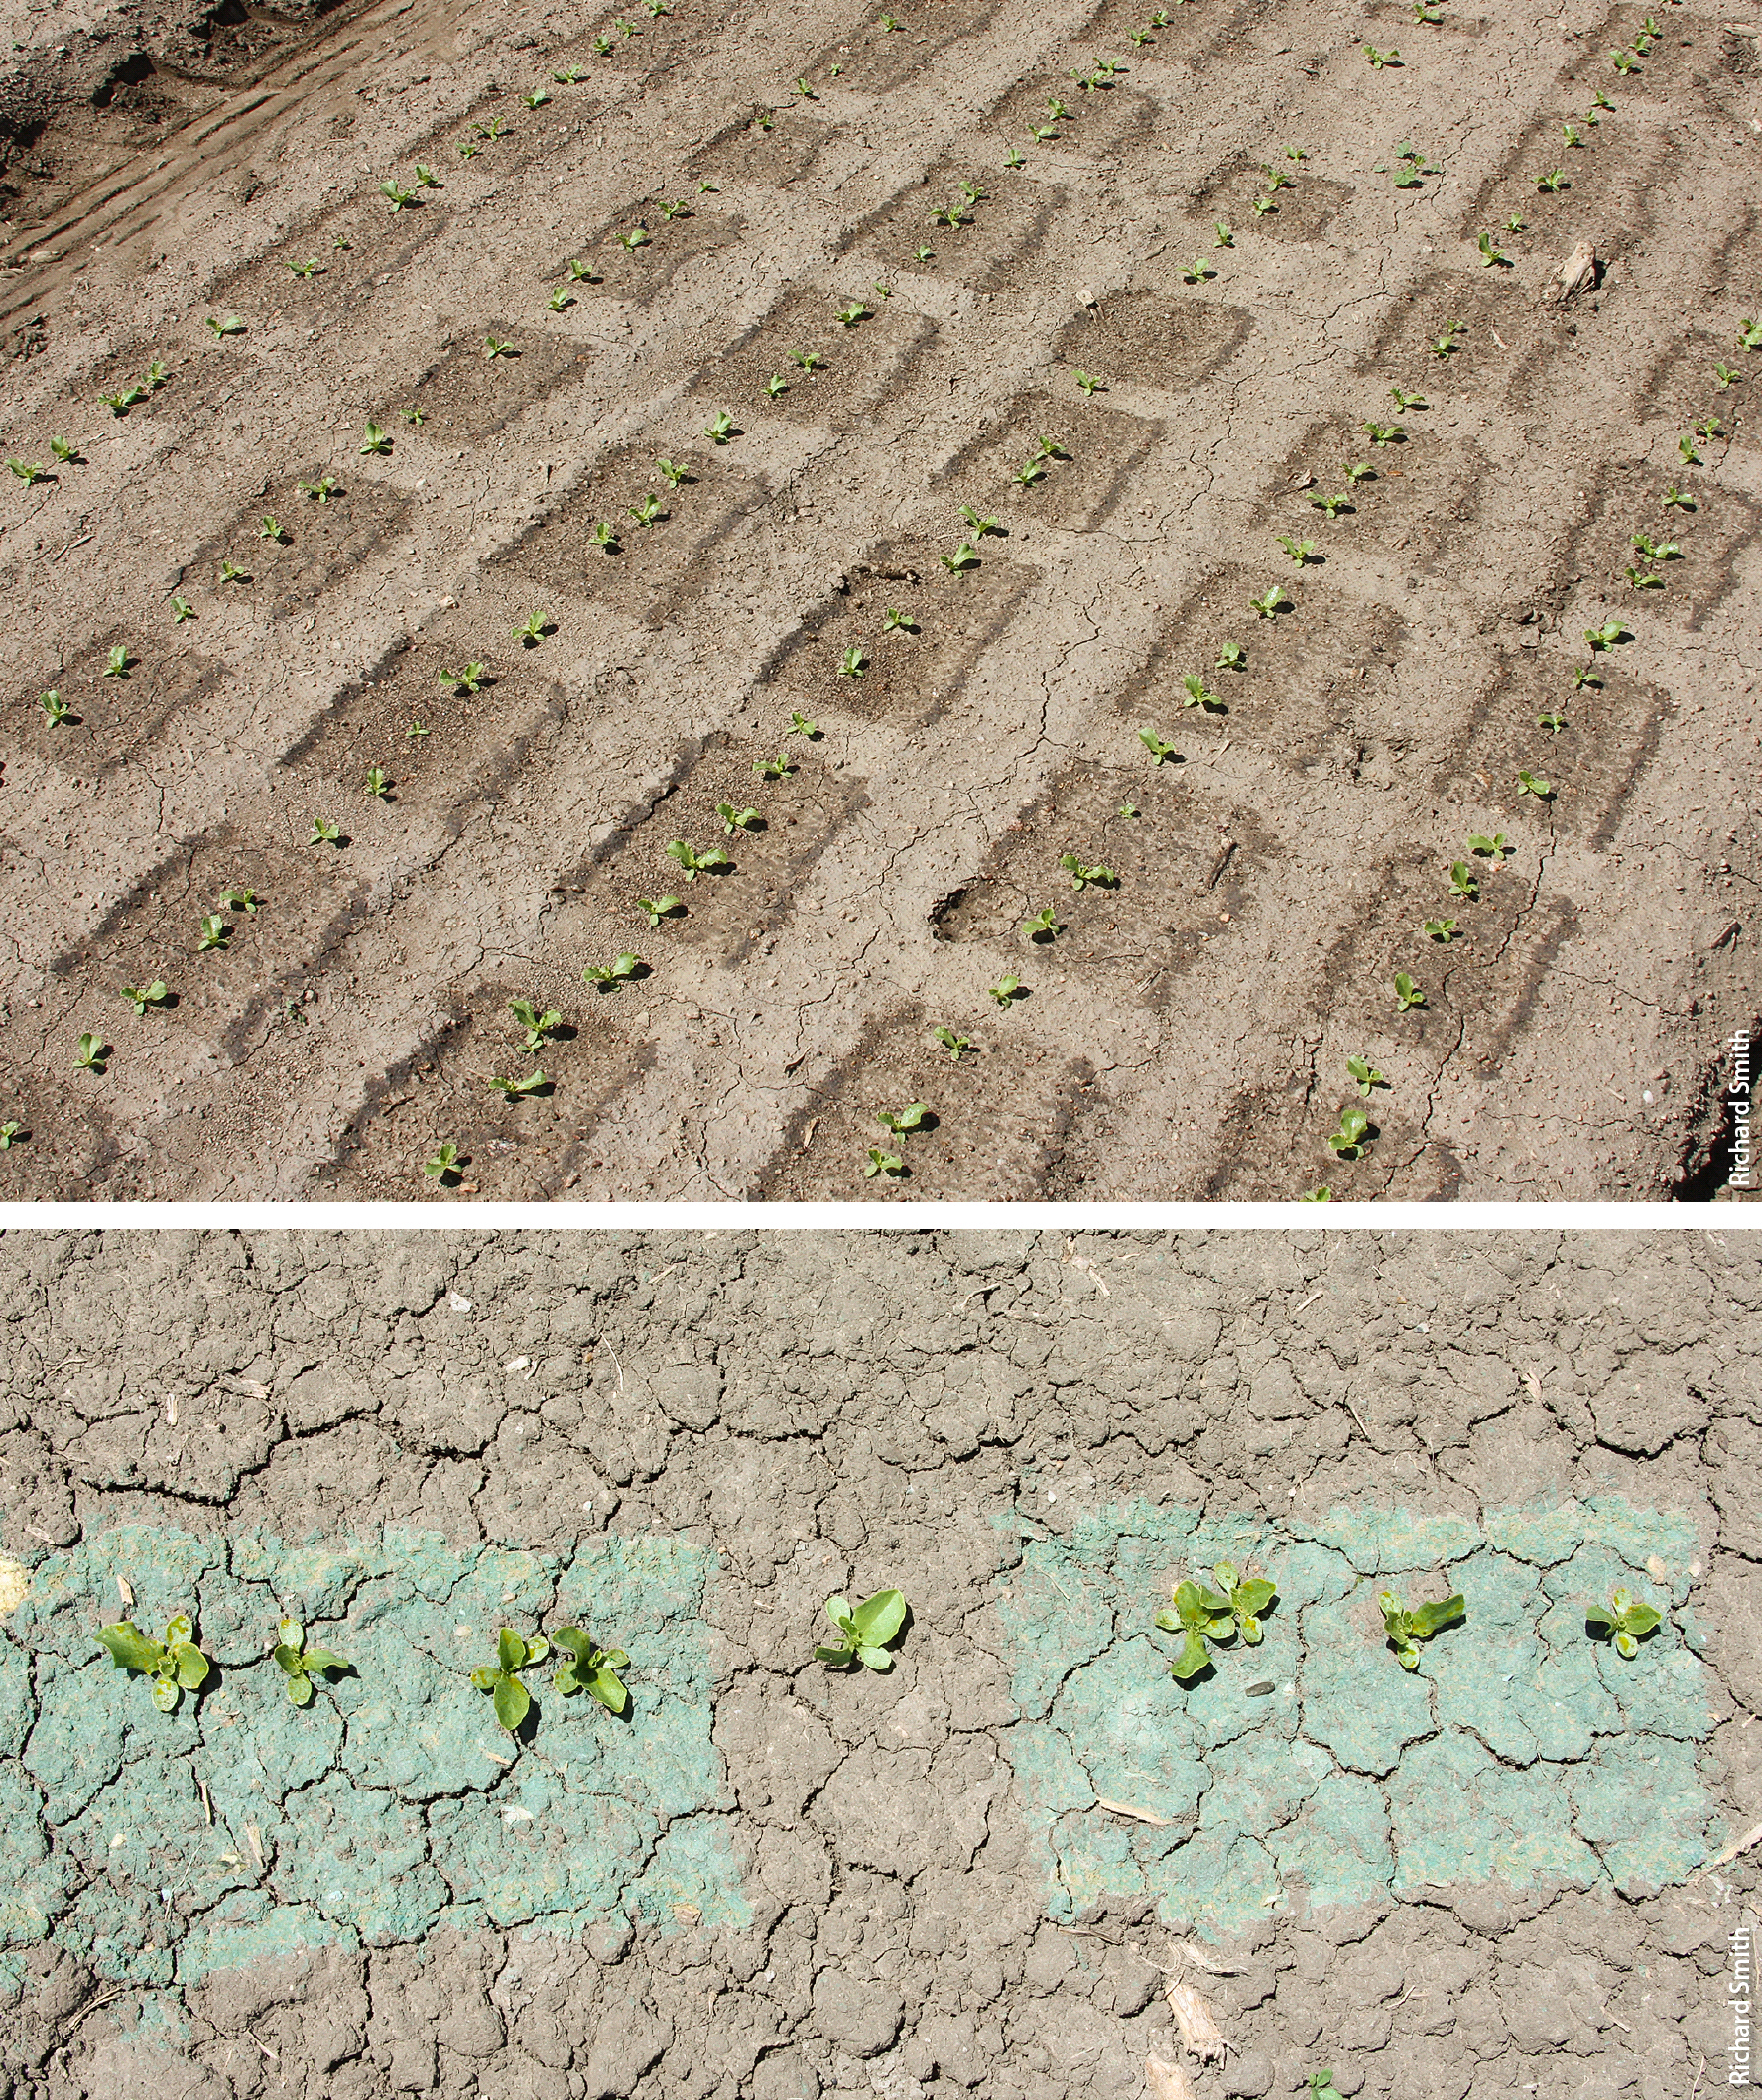 Top, lettuce beds were thinned by an automated thinner. Bottom, the unwanted plants were sprayed with an herbicide and marked with blue dye; the unsprayed plant is the keeper plant. Note the buffer area around the keeper plant.